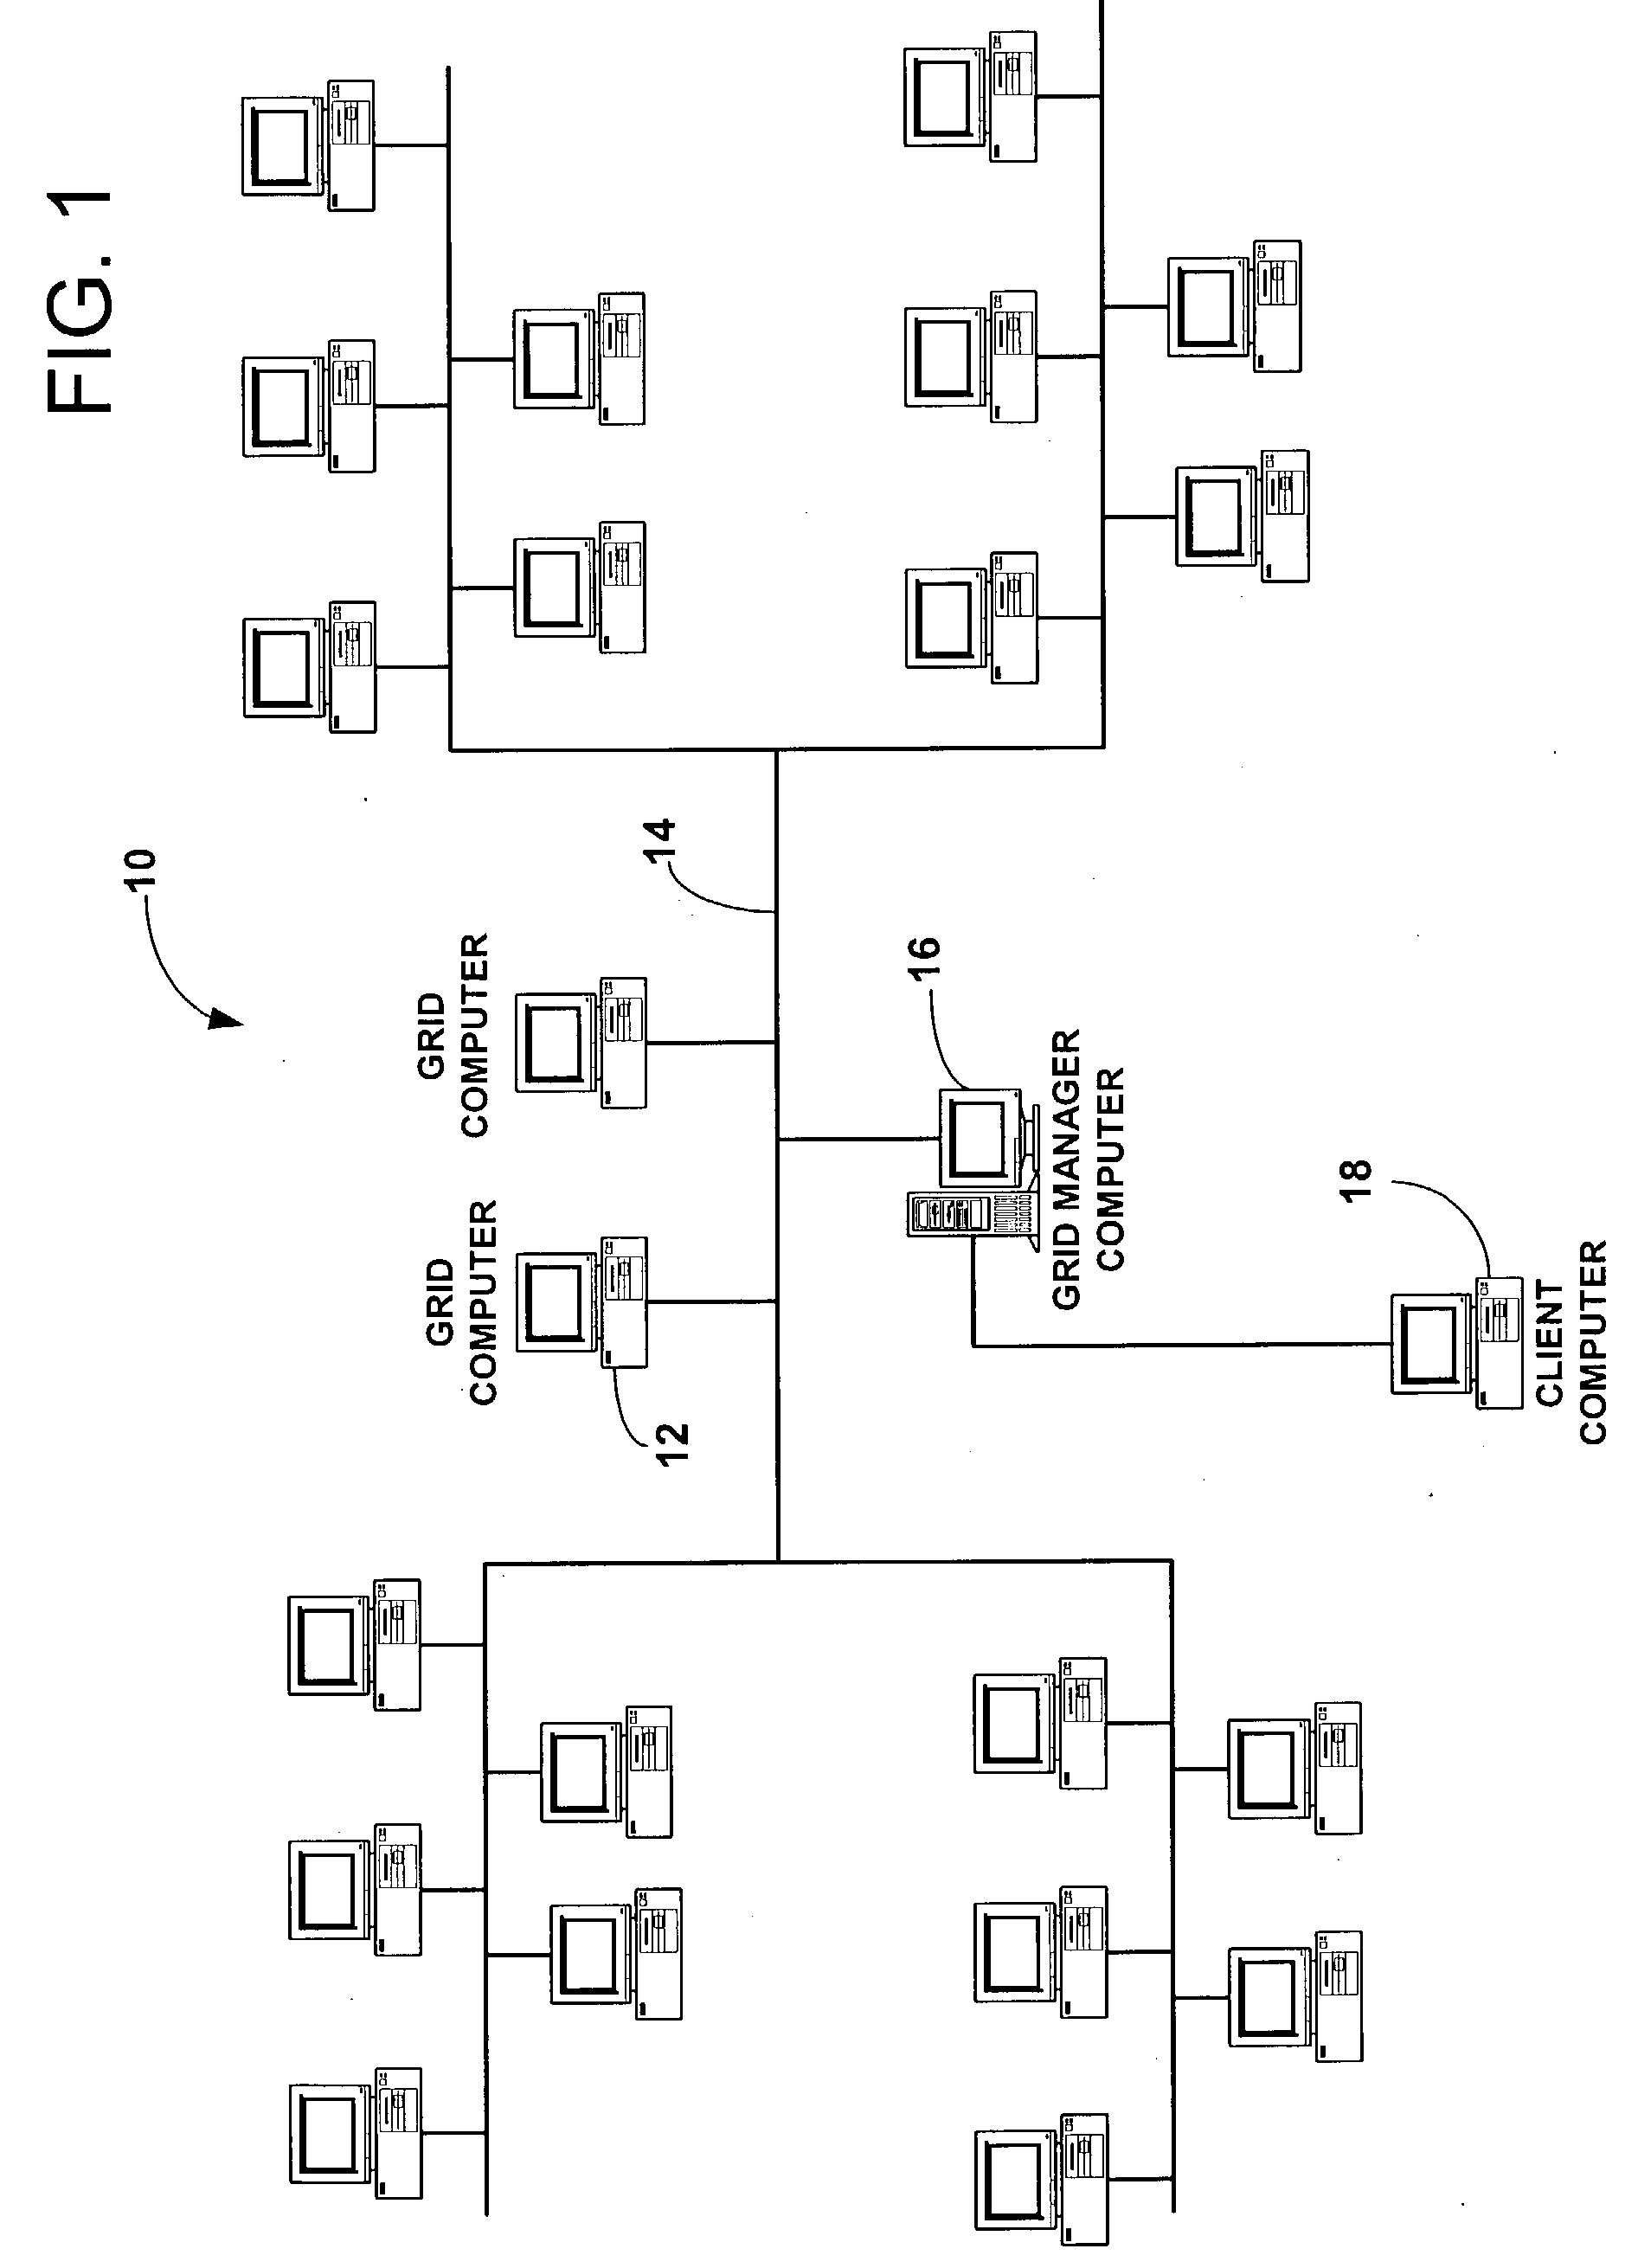 System for assigning and monitoring grid jobs on a computing grid